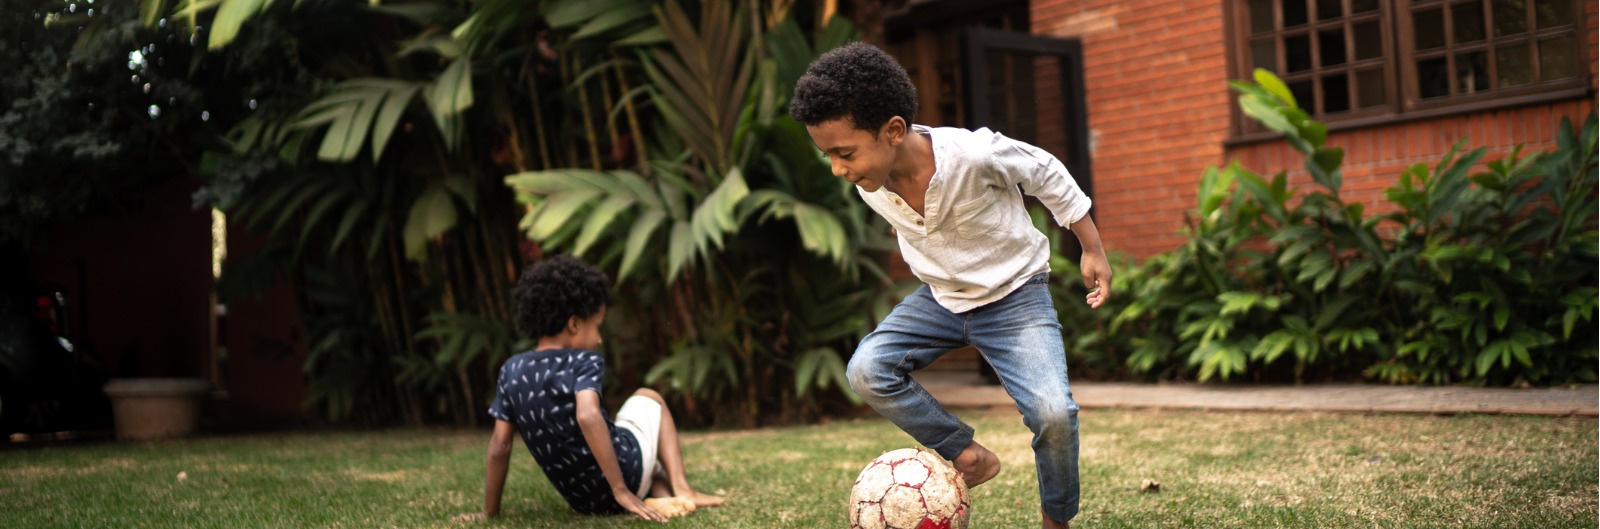 brothers-playing-soccer-in-the-backyard-picture-1600x529jpg.jpeg